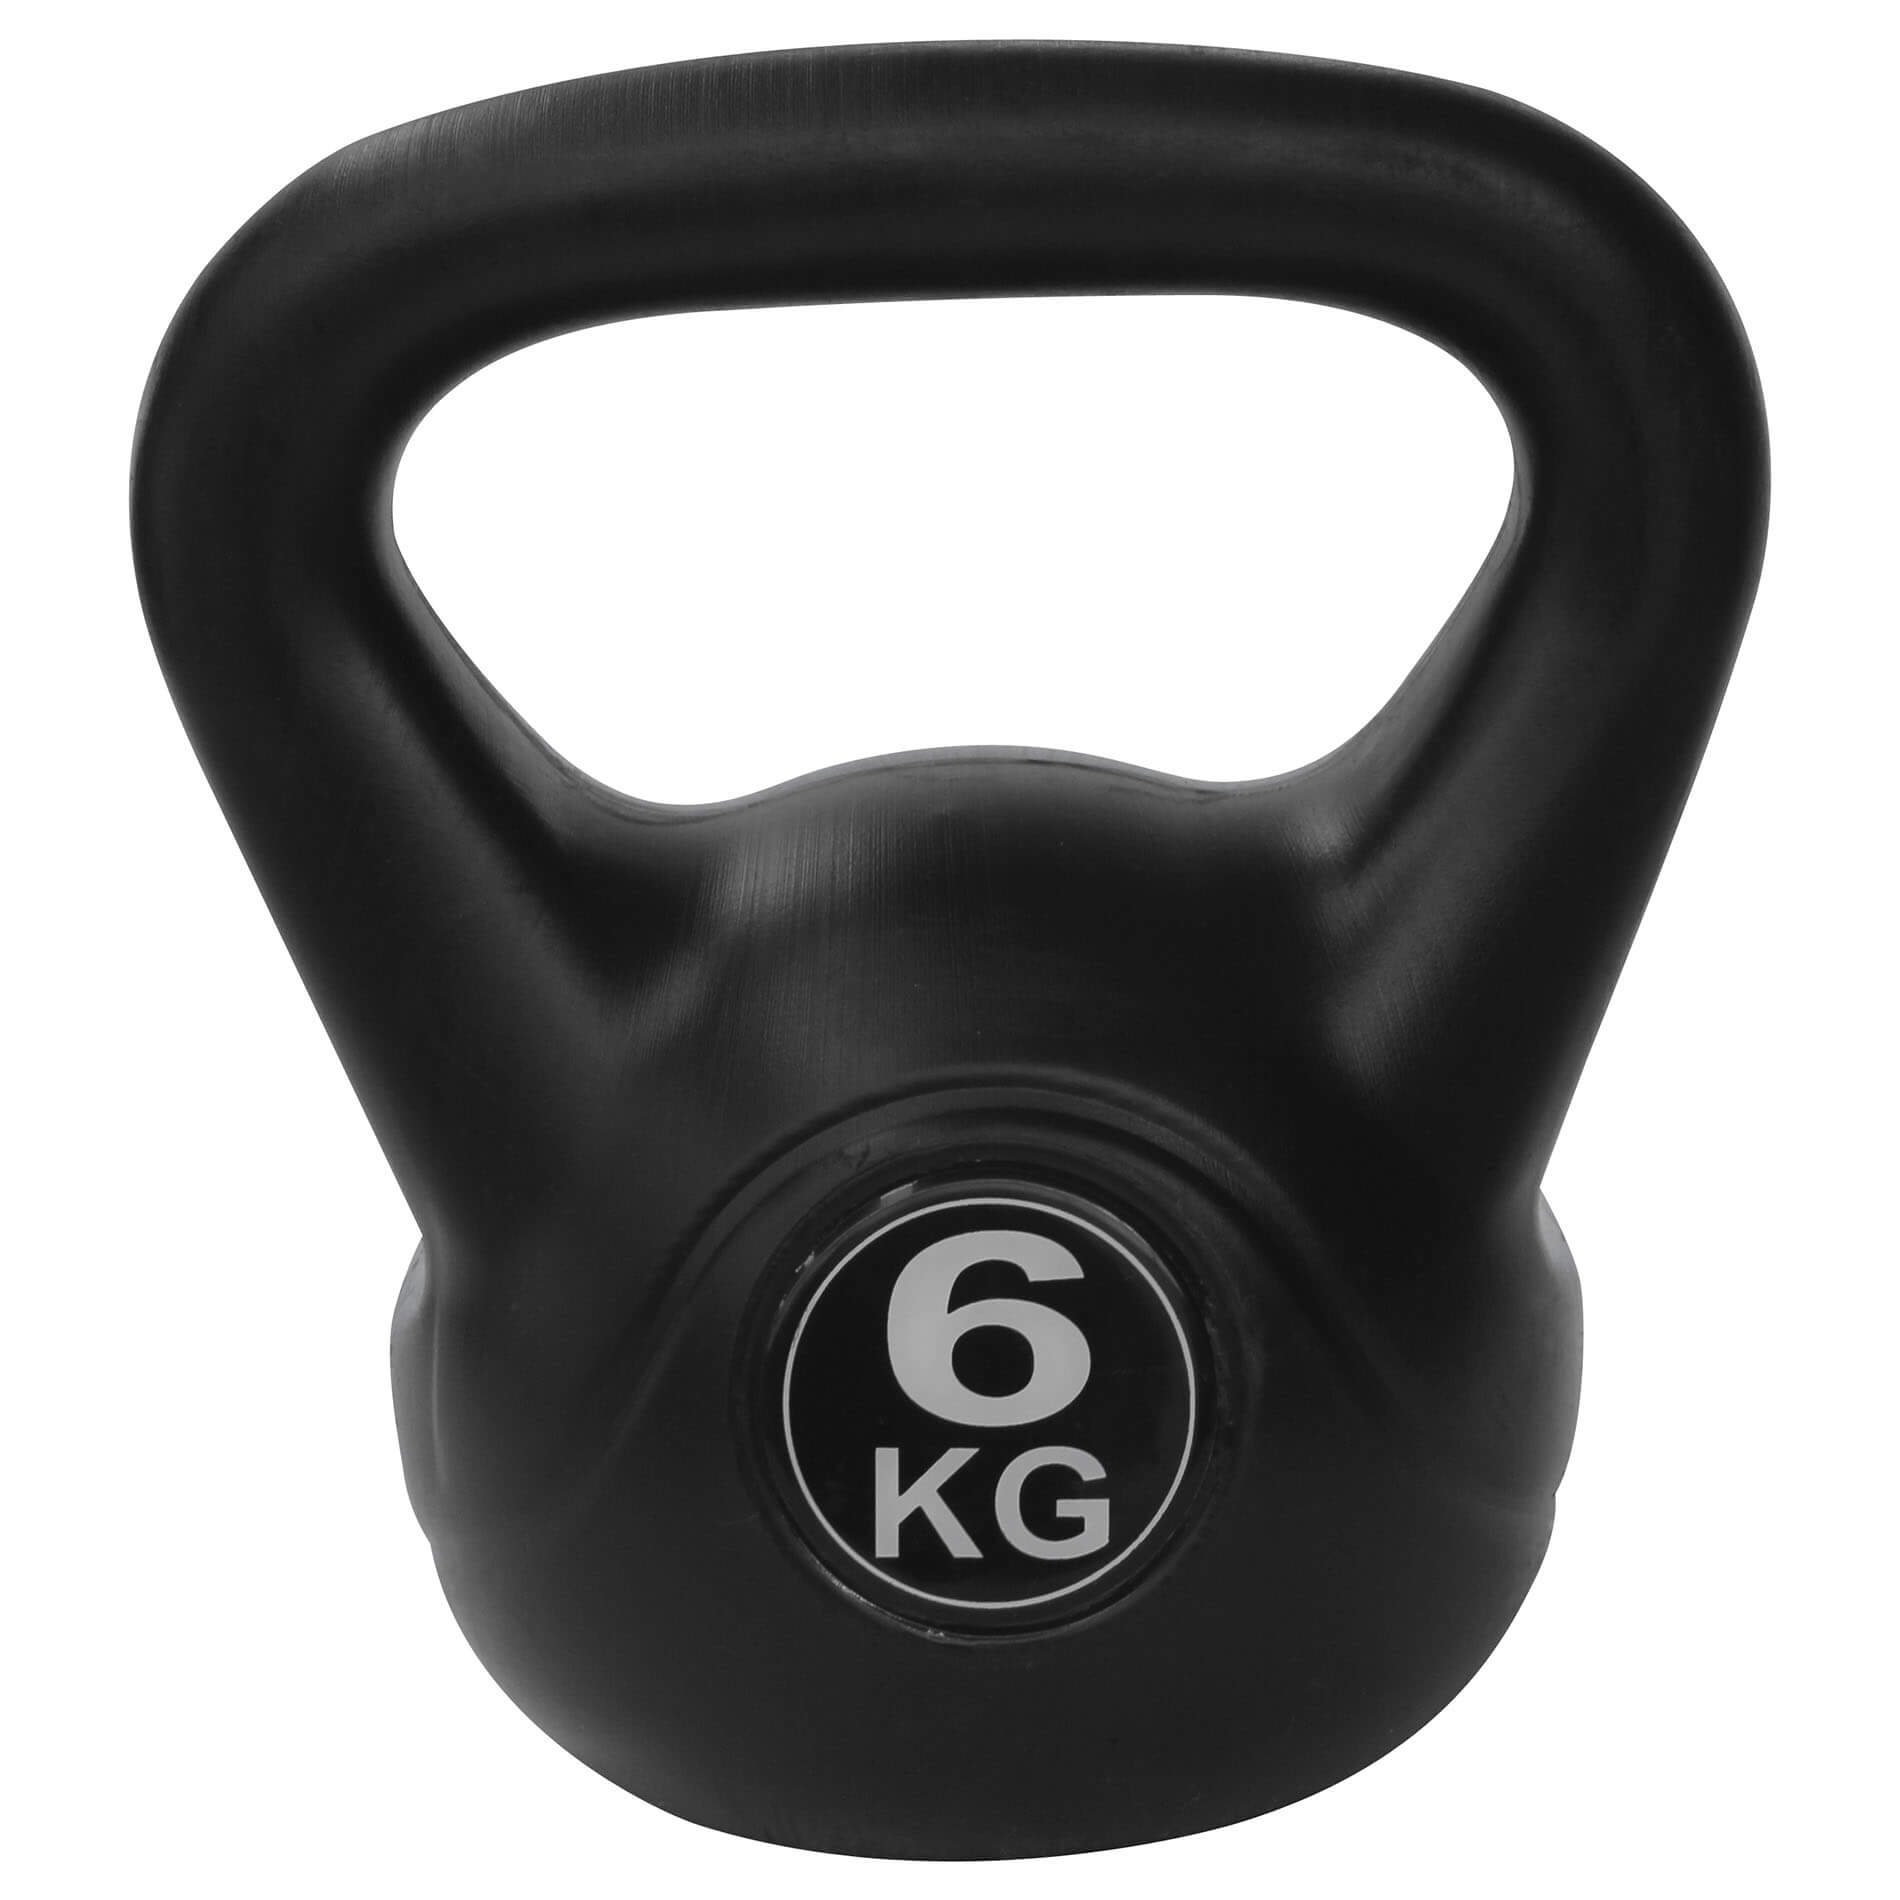 4-6kg Kettlebell Weight Fitness  Exercise Home Gym Training Workouts Kettlebells 